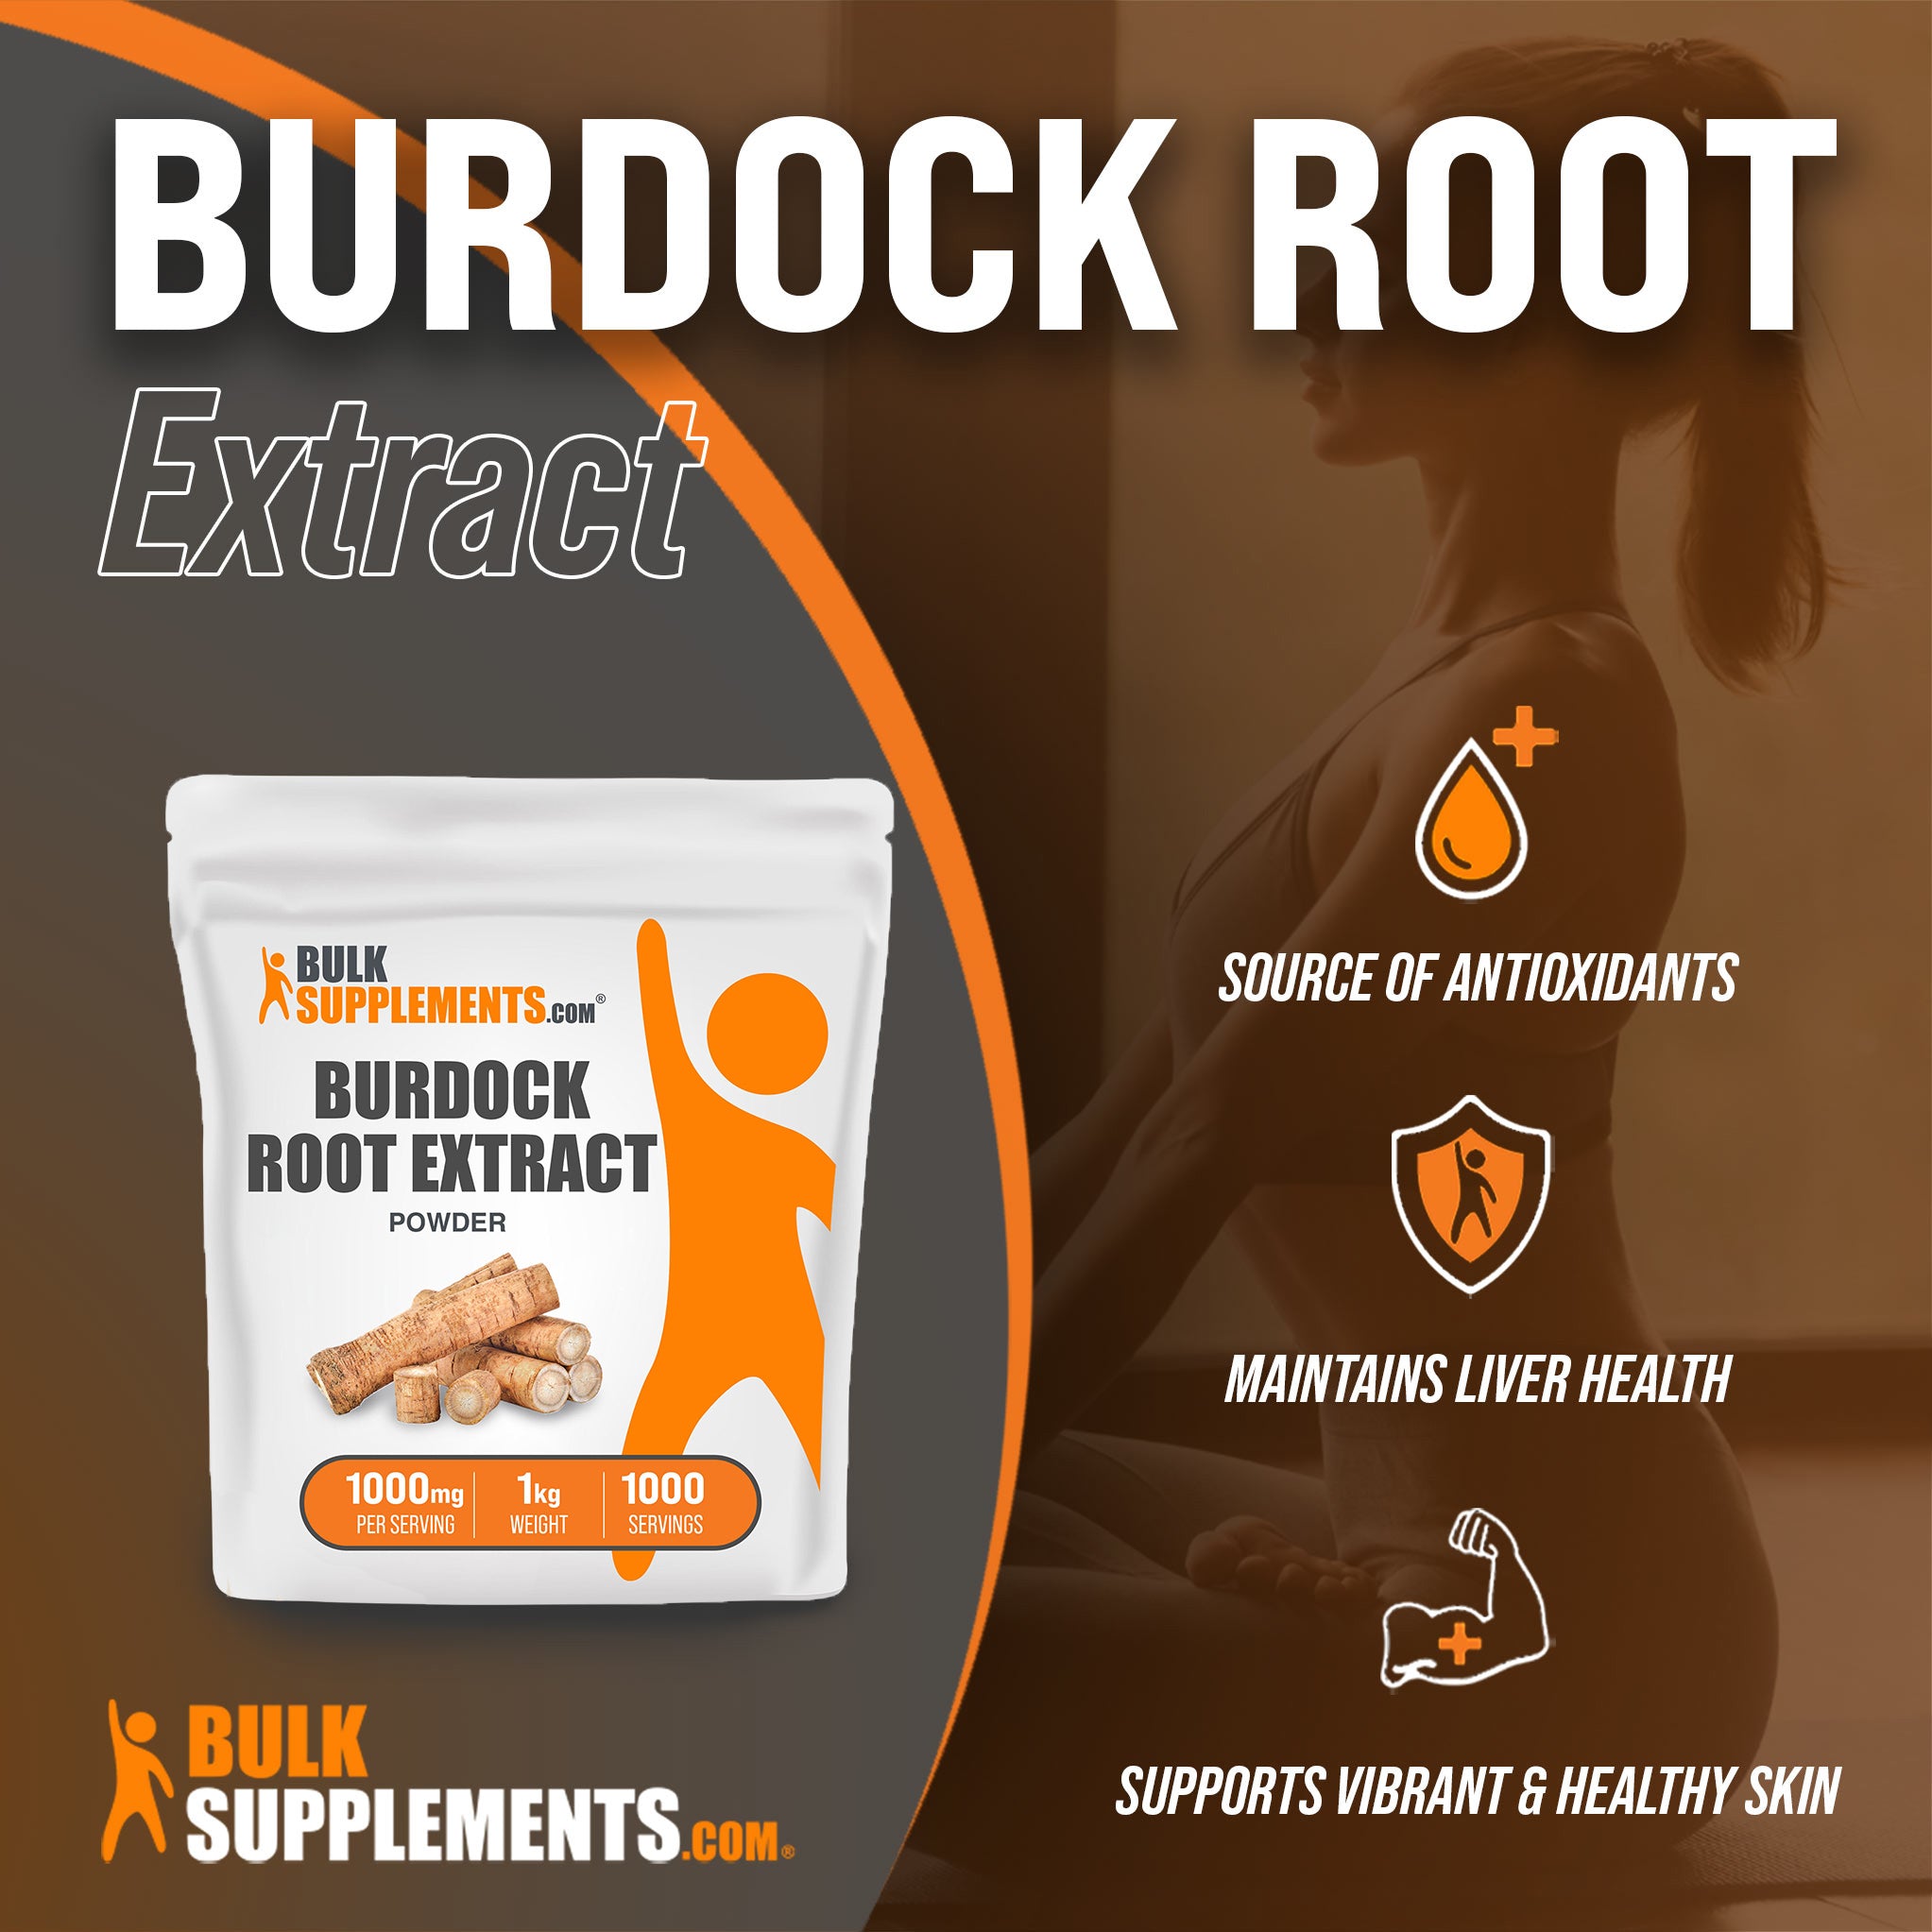 Benefits of Burdock Root Extract; source of antioxidants, maintains liver health, supports vibrant & healthy skin